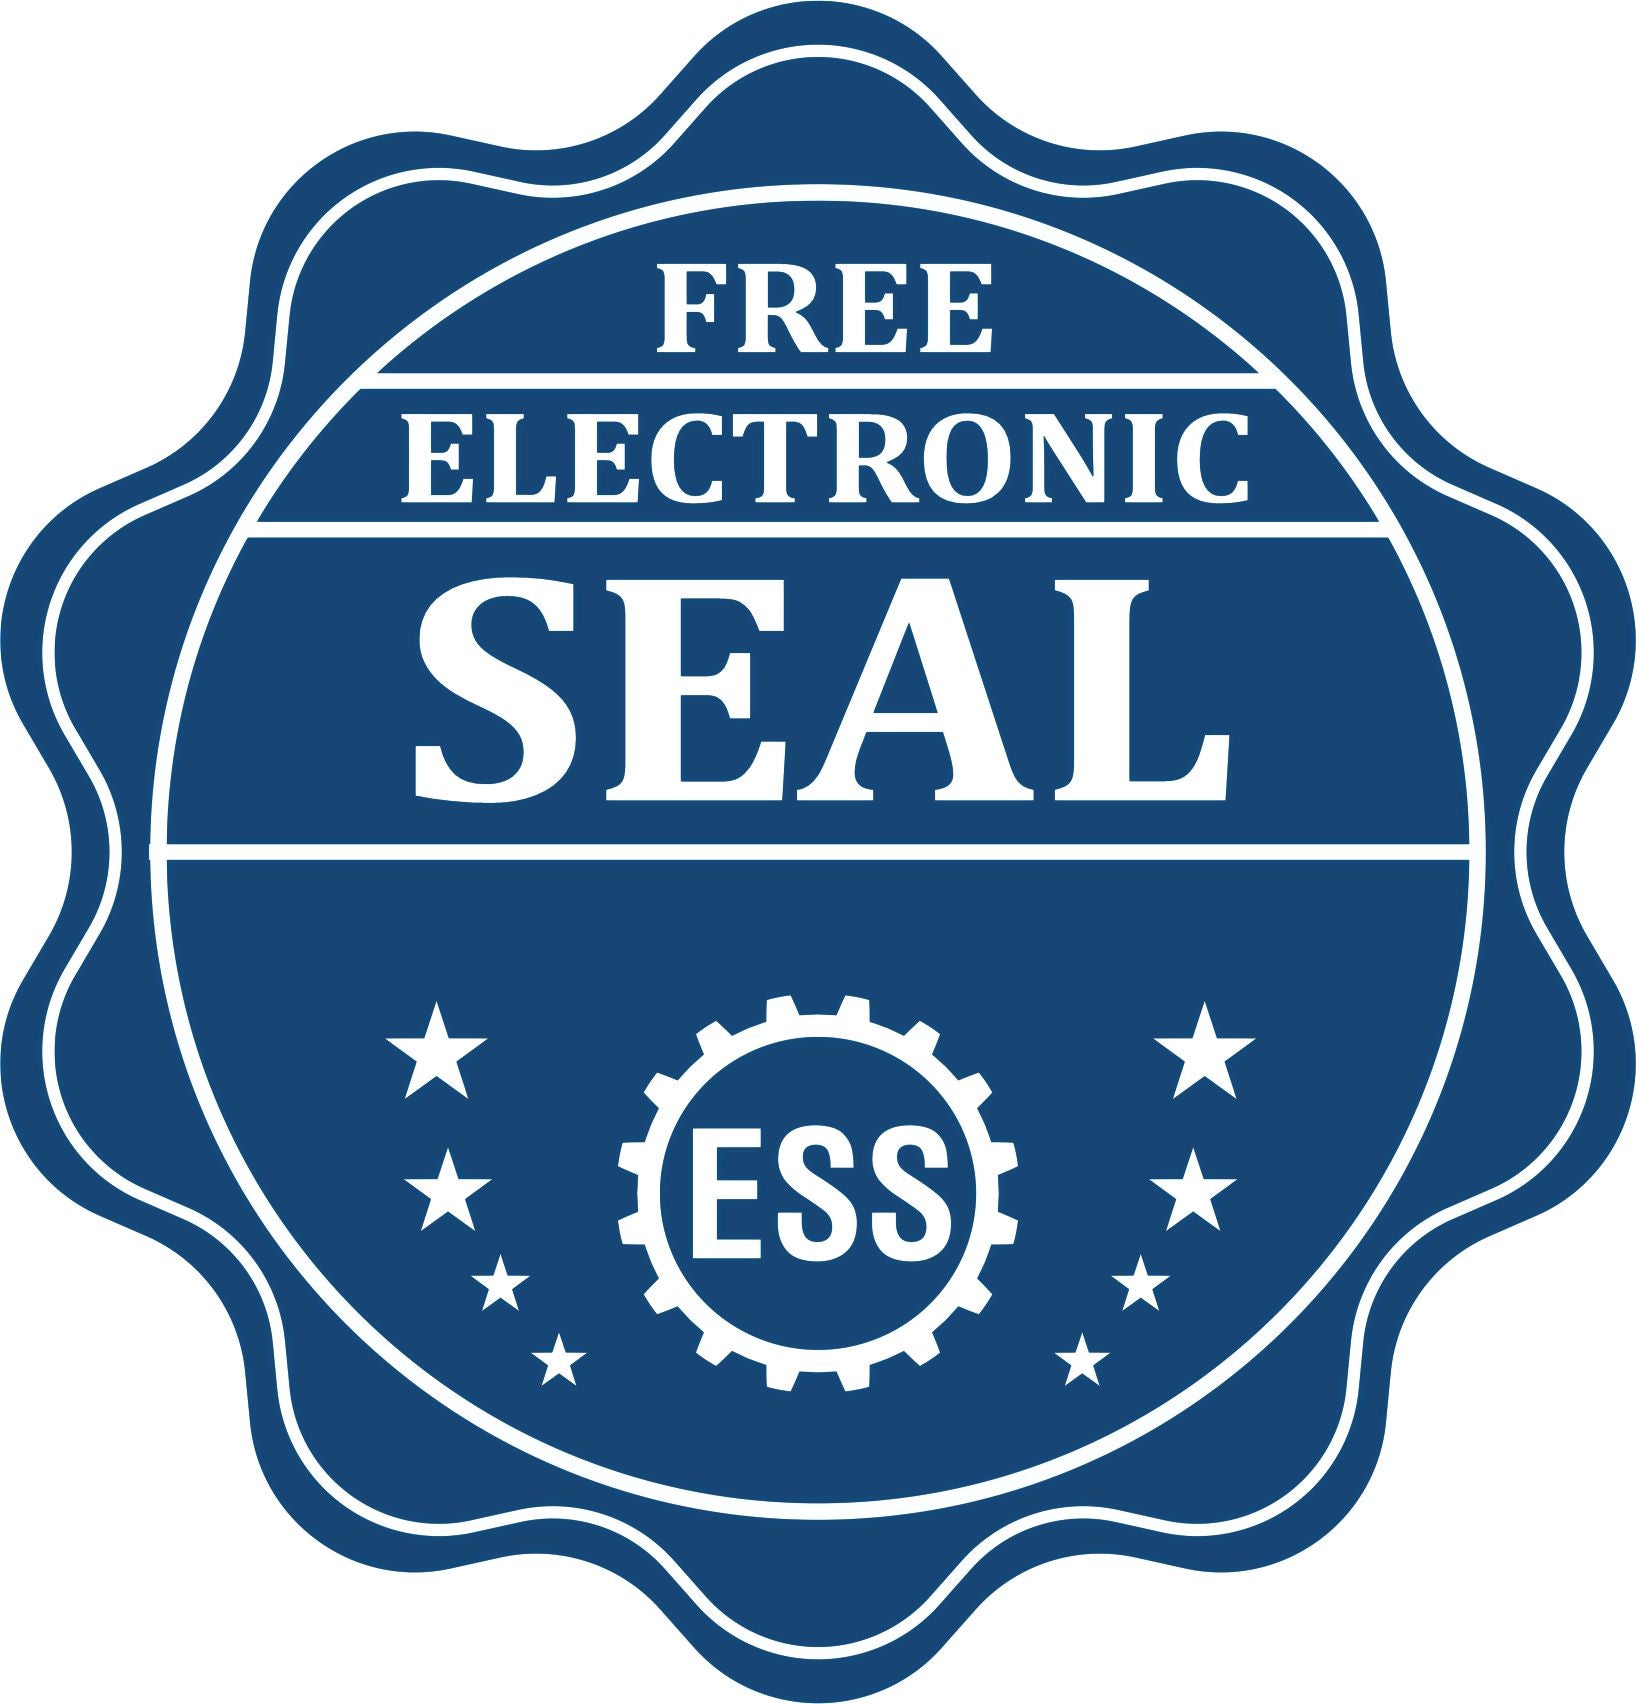 A badge showing a free electronic seal for the Heavy Duty Connecticut Landscape Architect Cast Iron Embosser with stars and the ESS gear on the emblem.